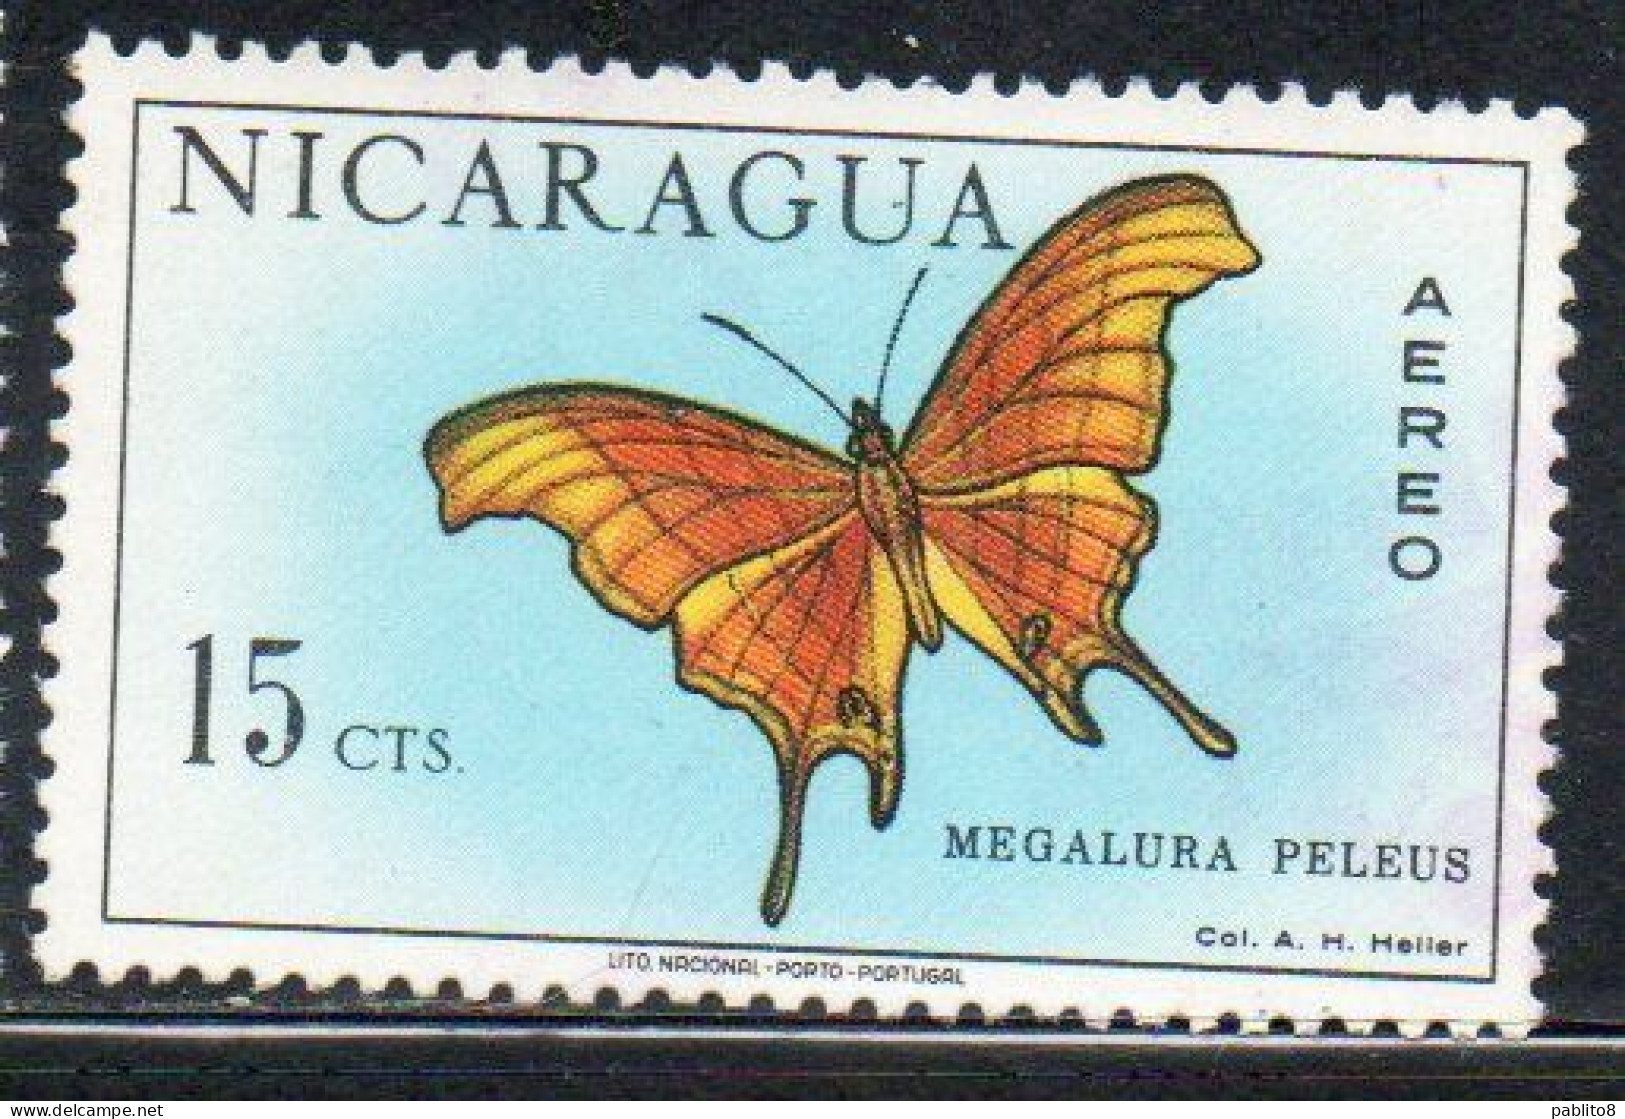 NICARAGUA 1967 AIR POST MAIL AIRMAIL BUTTERFLIES FARFALLE BUTTERFLY MEGALURA PELEUS 15c USED USATO OBLITERE' - Nicaragua